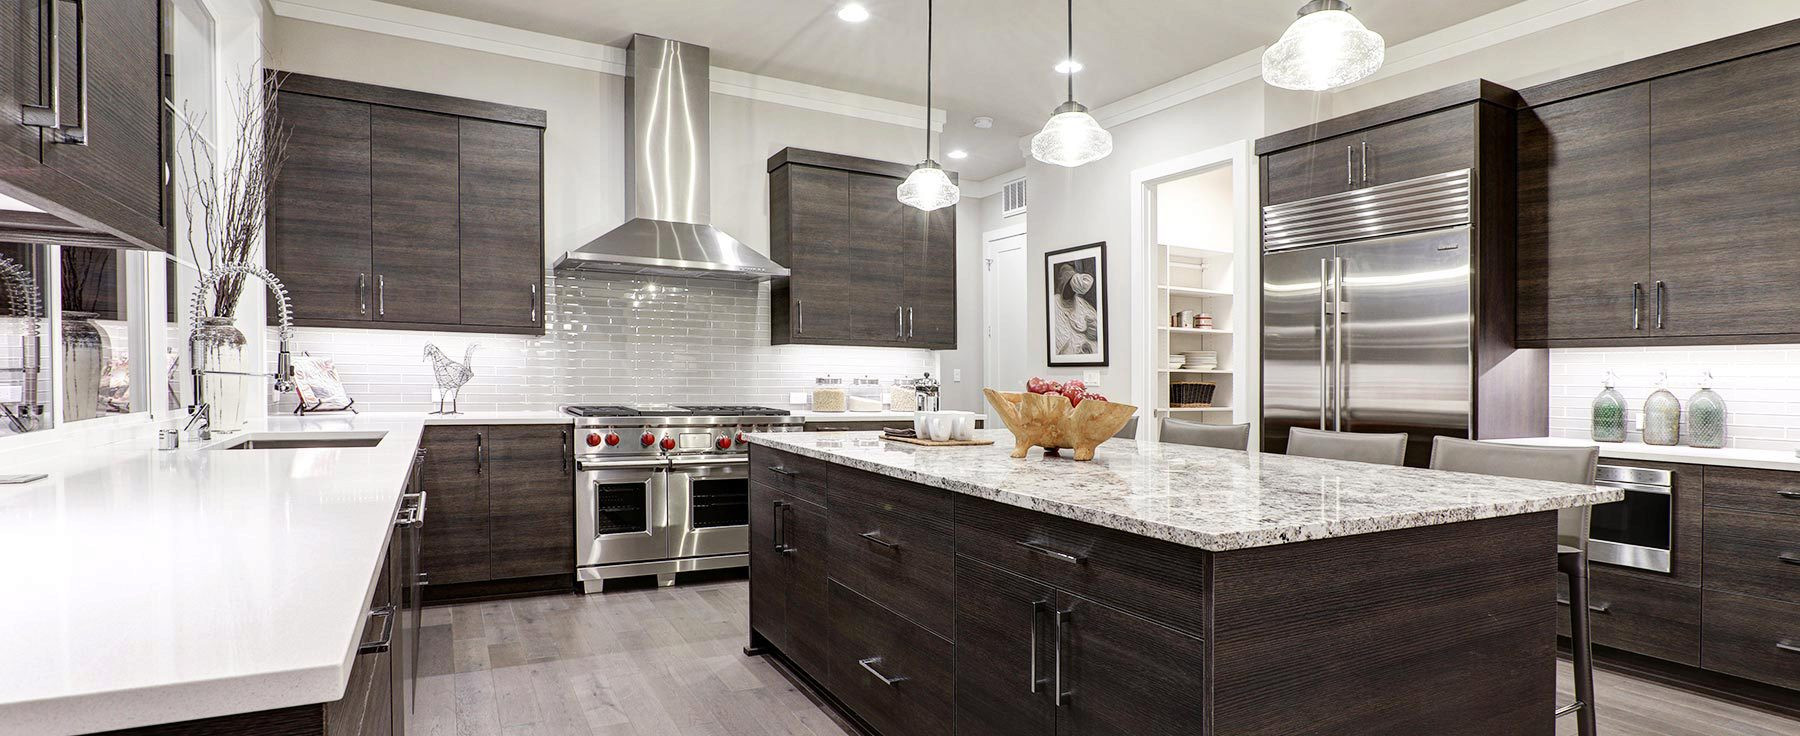 Kitchen Cabinet Remodel Cost
 Remodeling Your Kitchen Learn These Secrets Before Jumping In